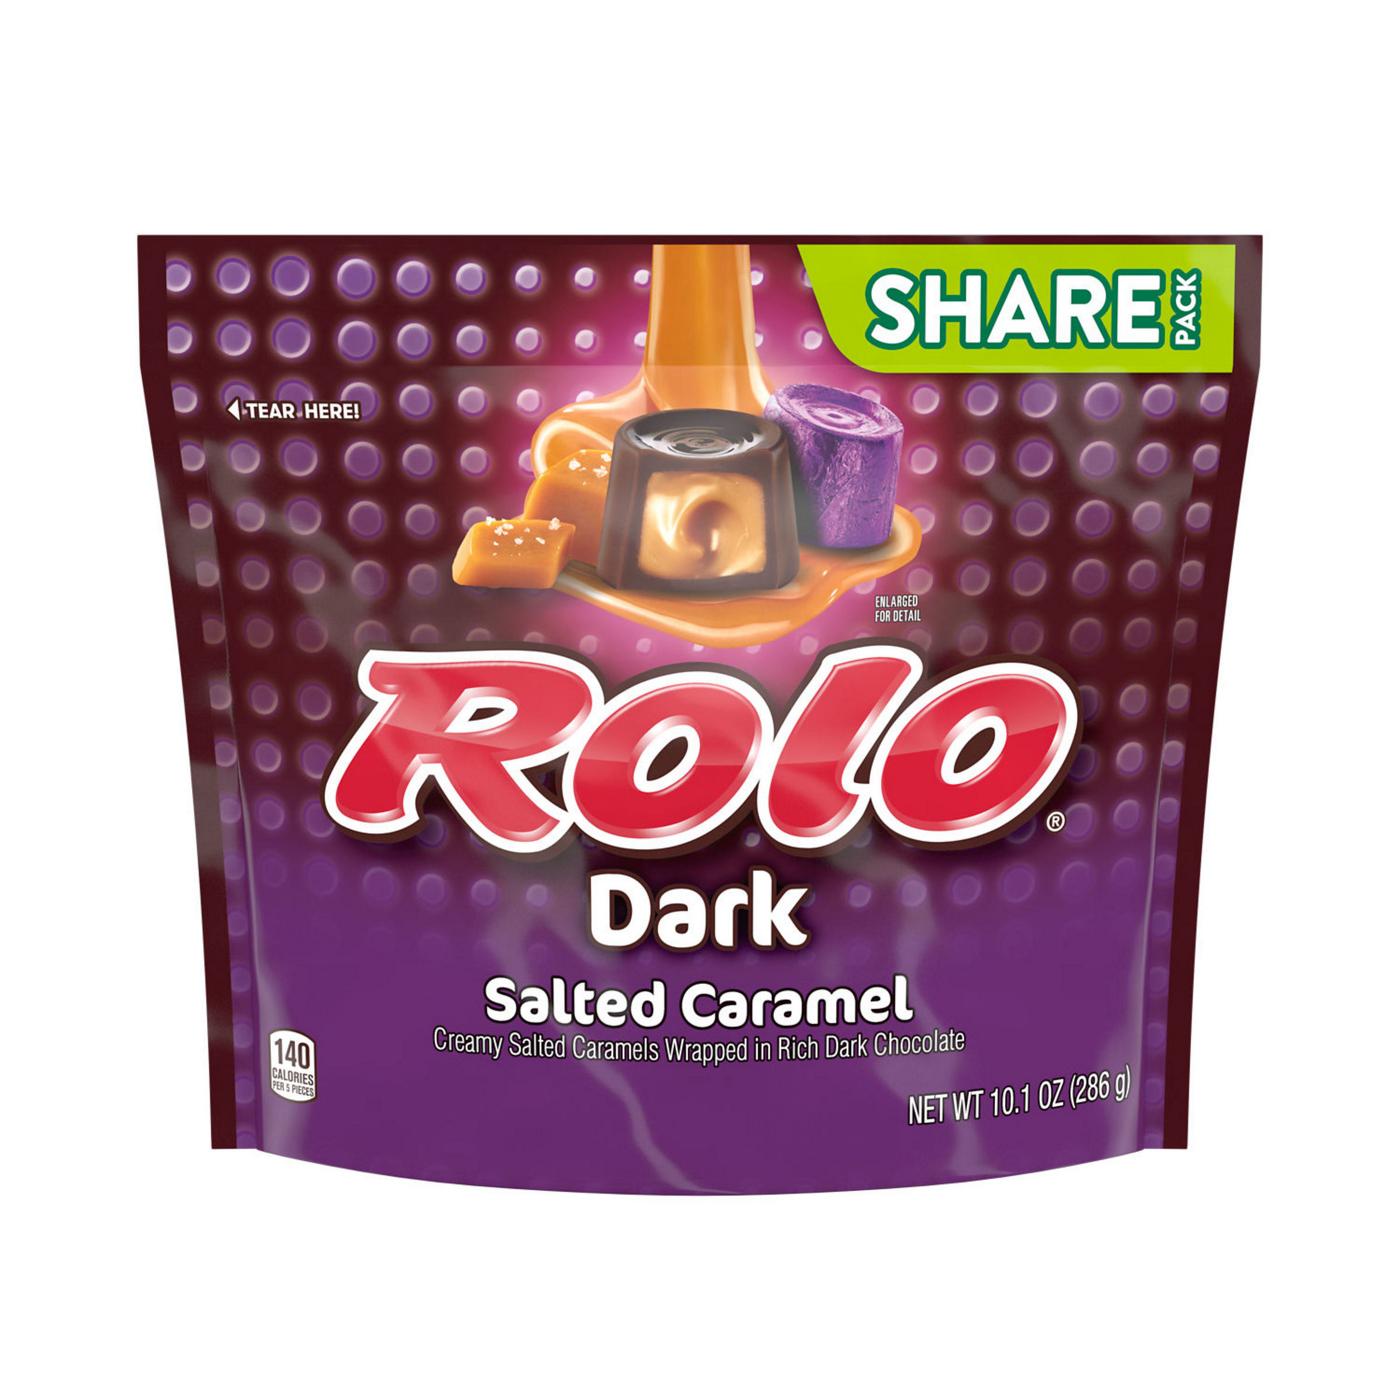 Rolo Dark Salted Caramel Chocolate Candy - Share Pack; image 1 of 2